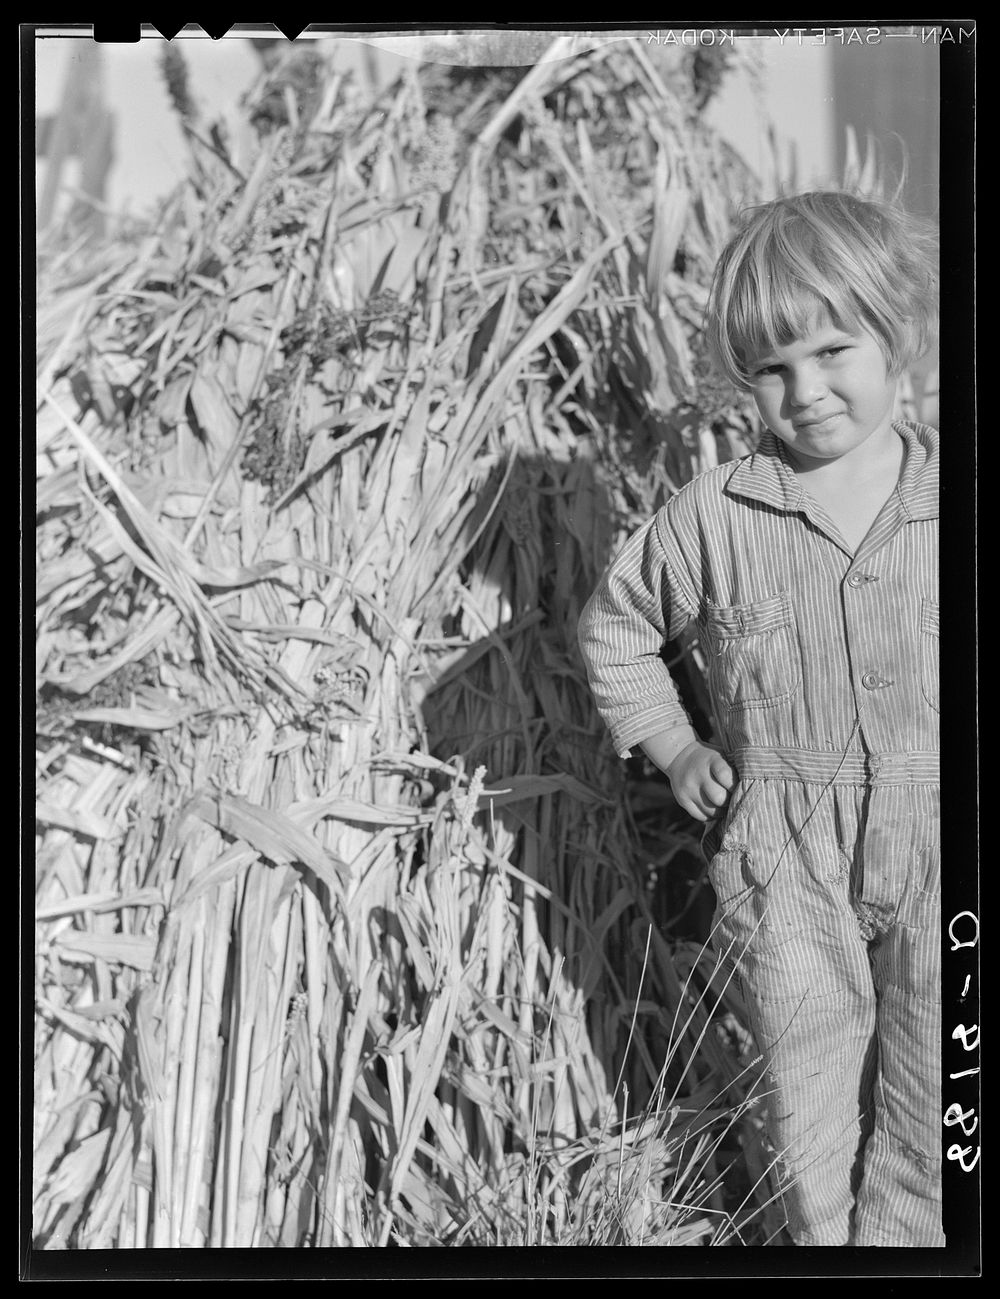 Farmer's daughter. Republic County, Kansas. Sourced from the Library of Congress.